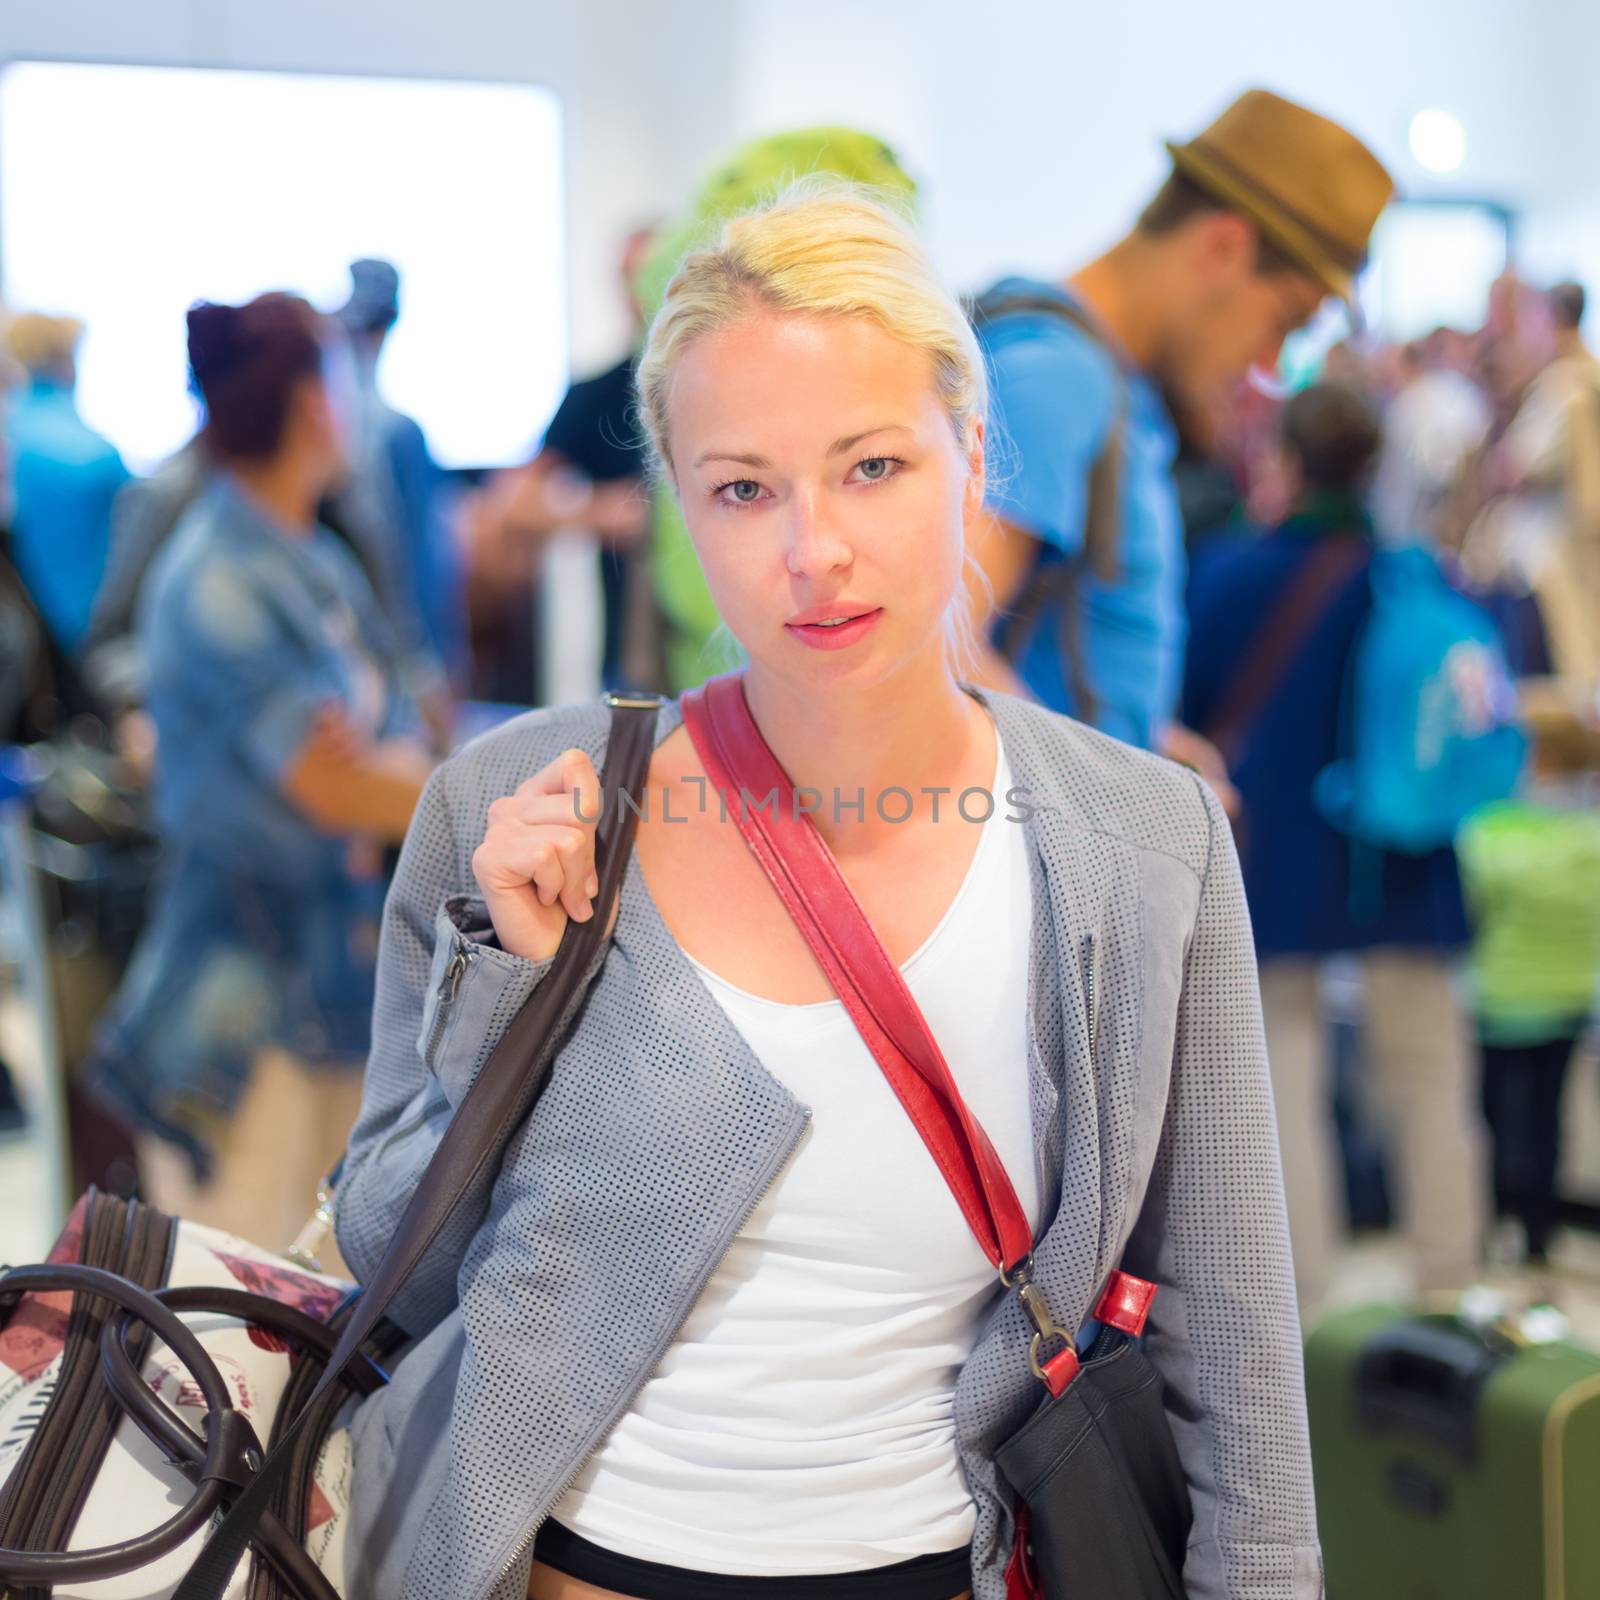 Female traveller waiting in airport terminal. by kasto